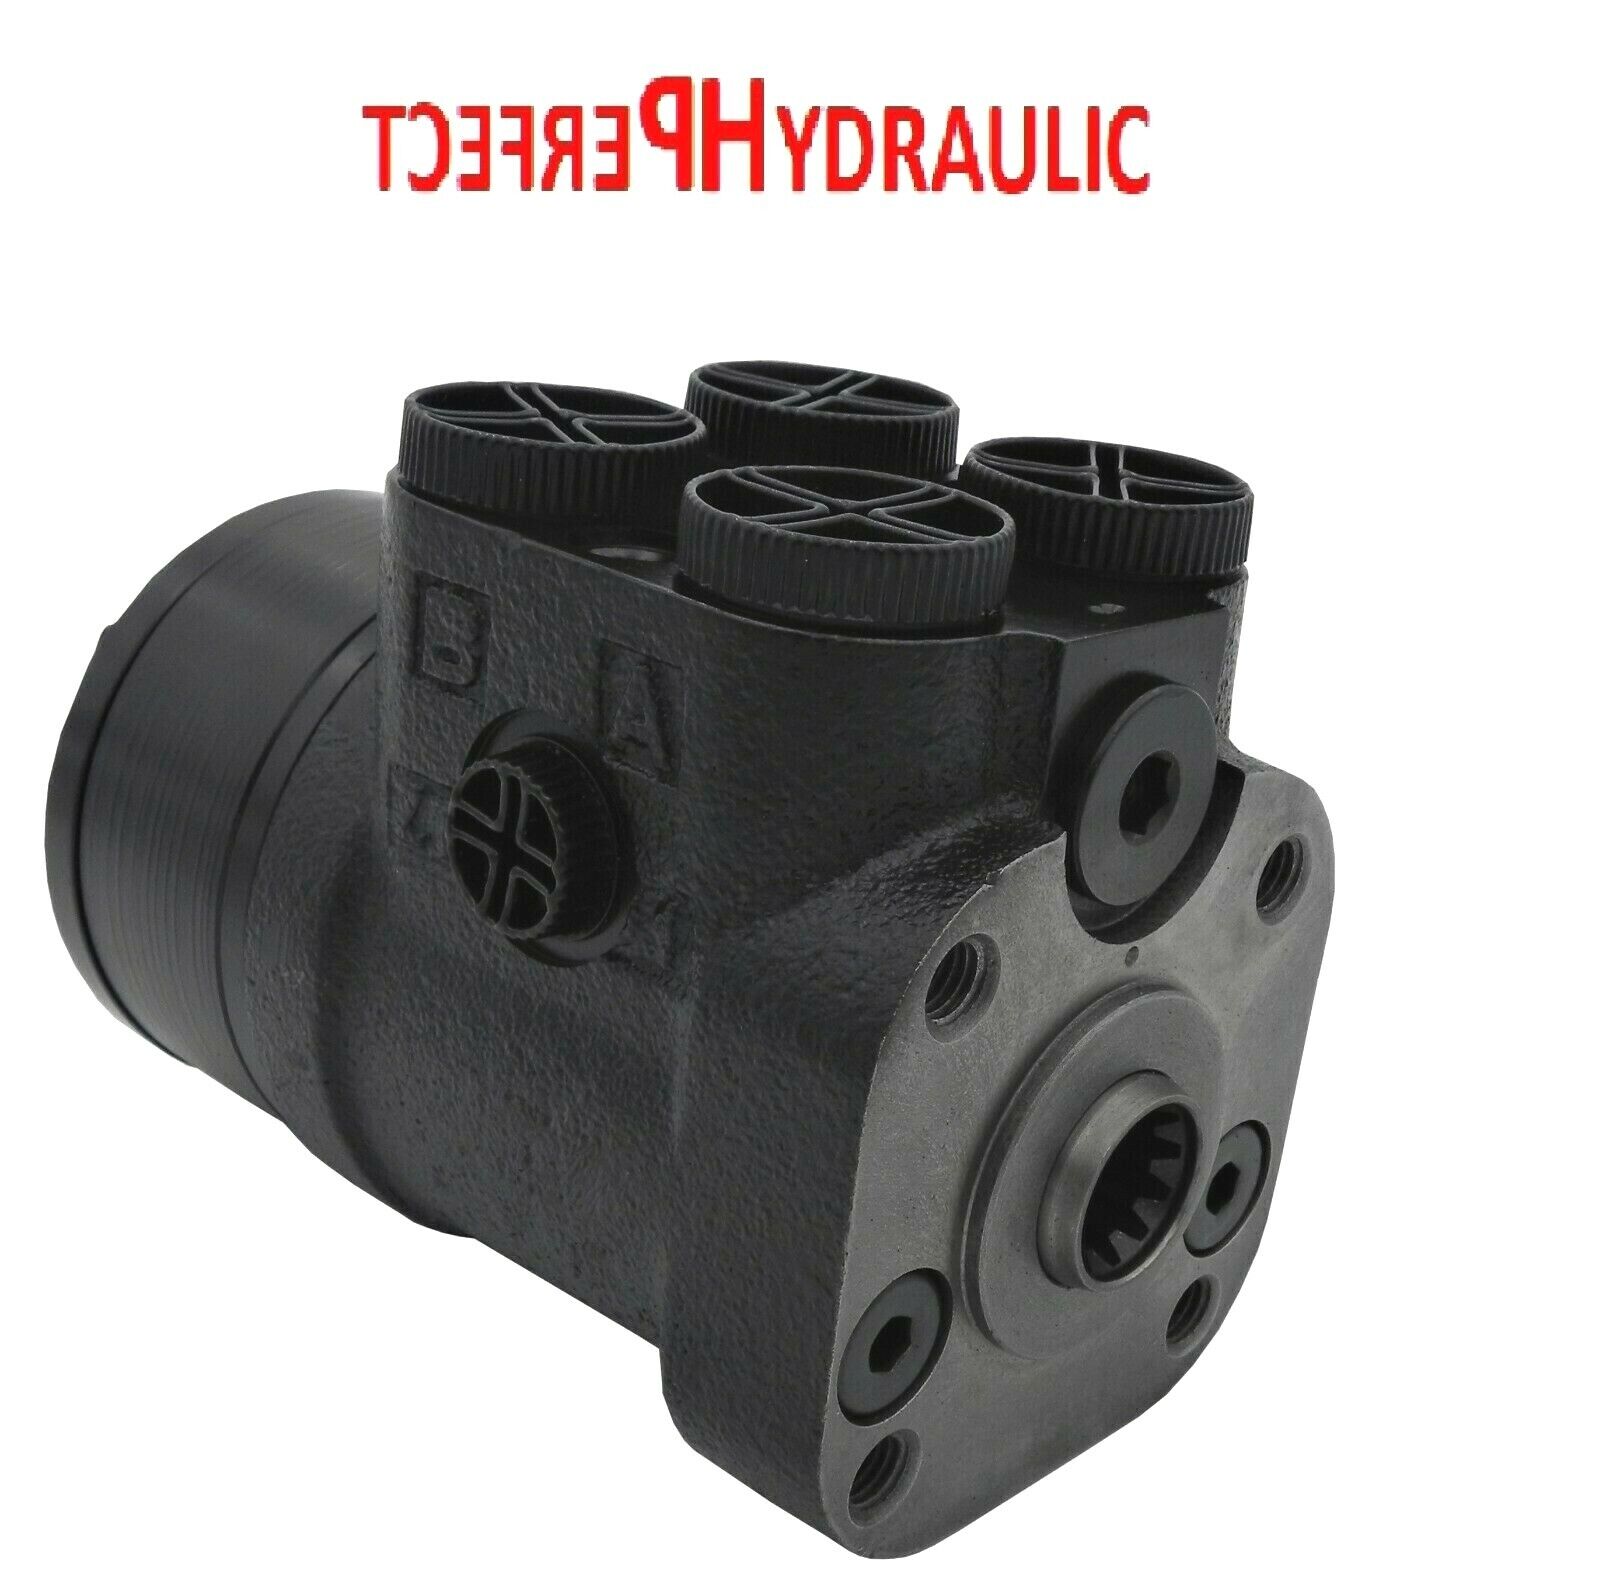 OSPC dynamic LS (load-sensing) steering units from 50 to 199 cc/rev